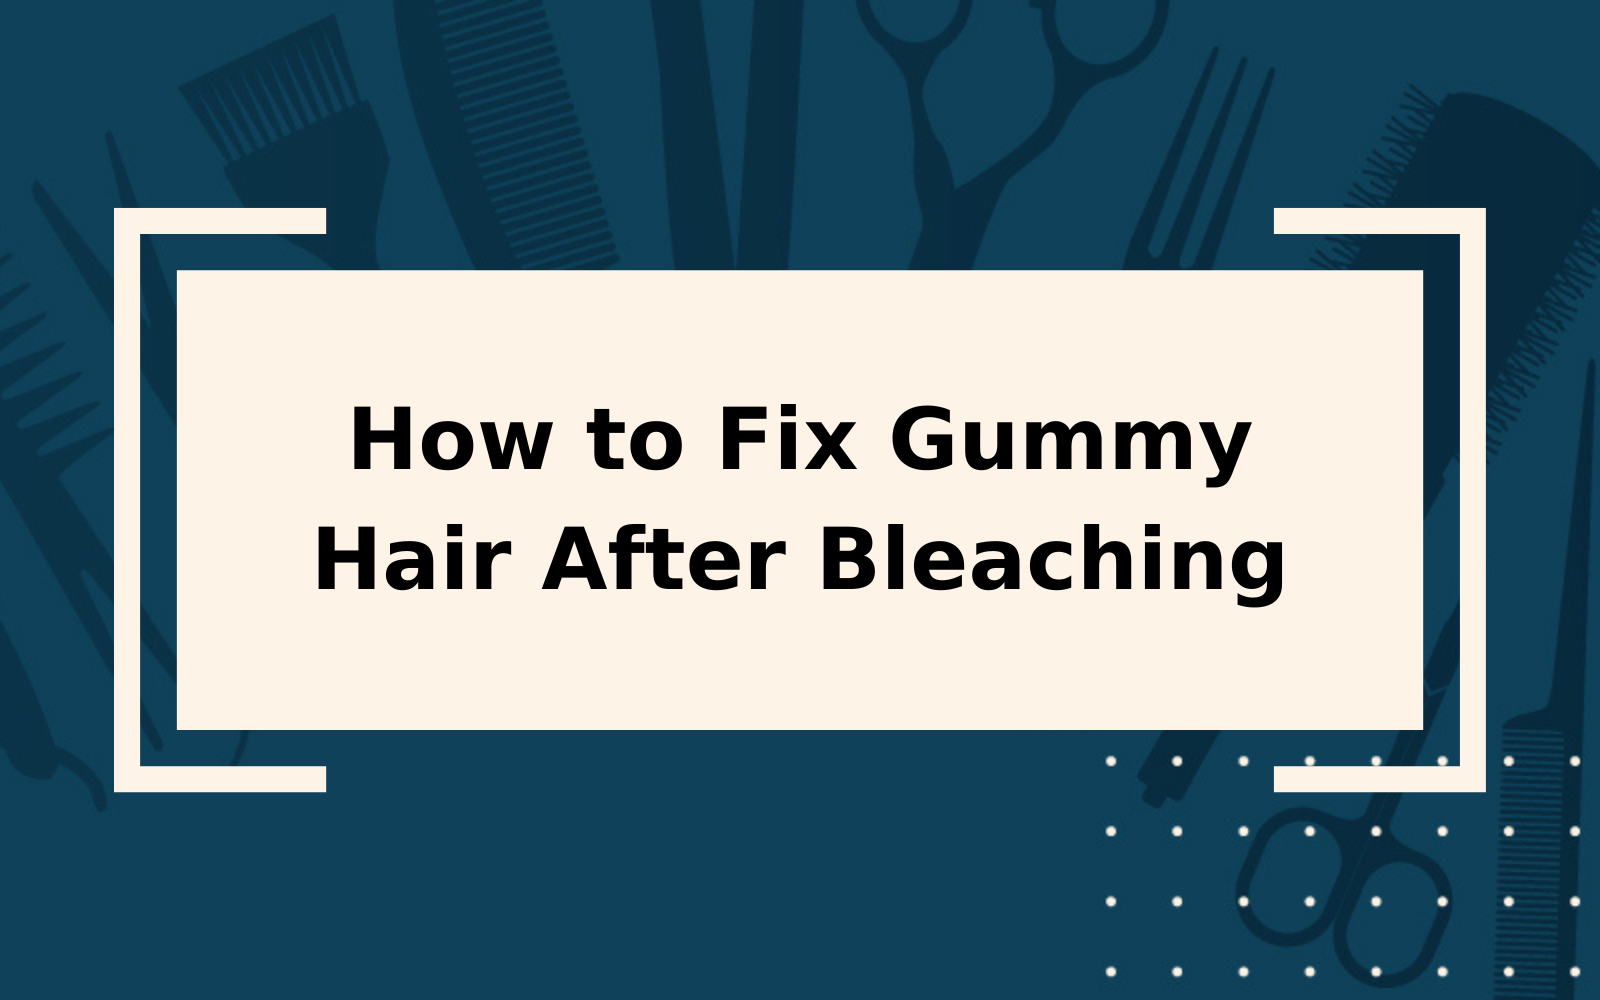 How to Fix Gummy Hair After Bleaching | Step-by-Step